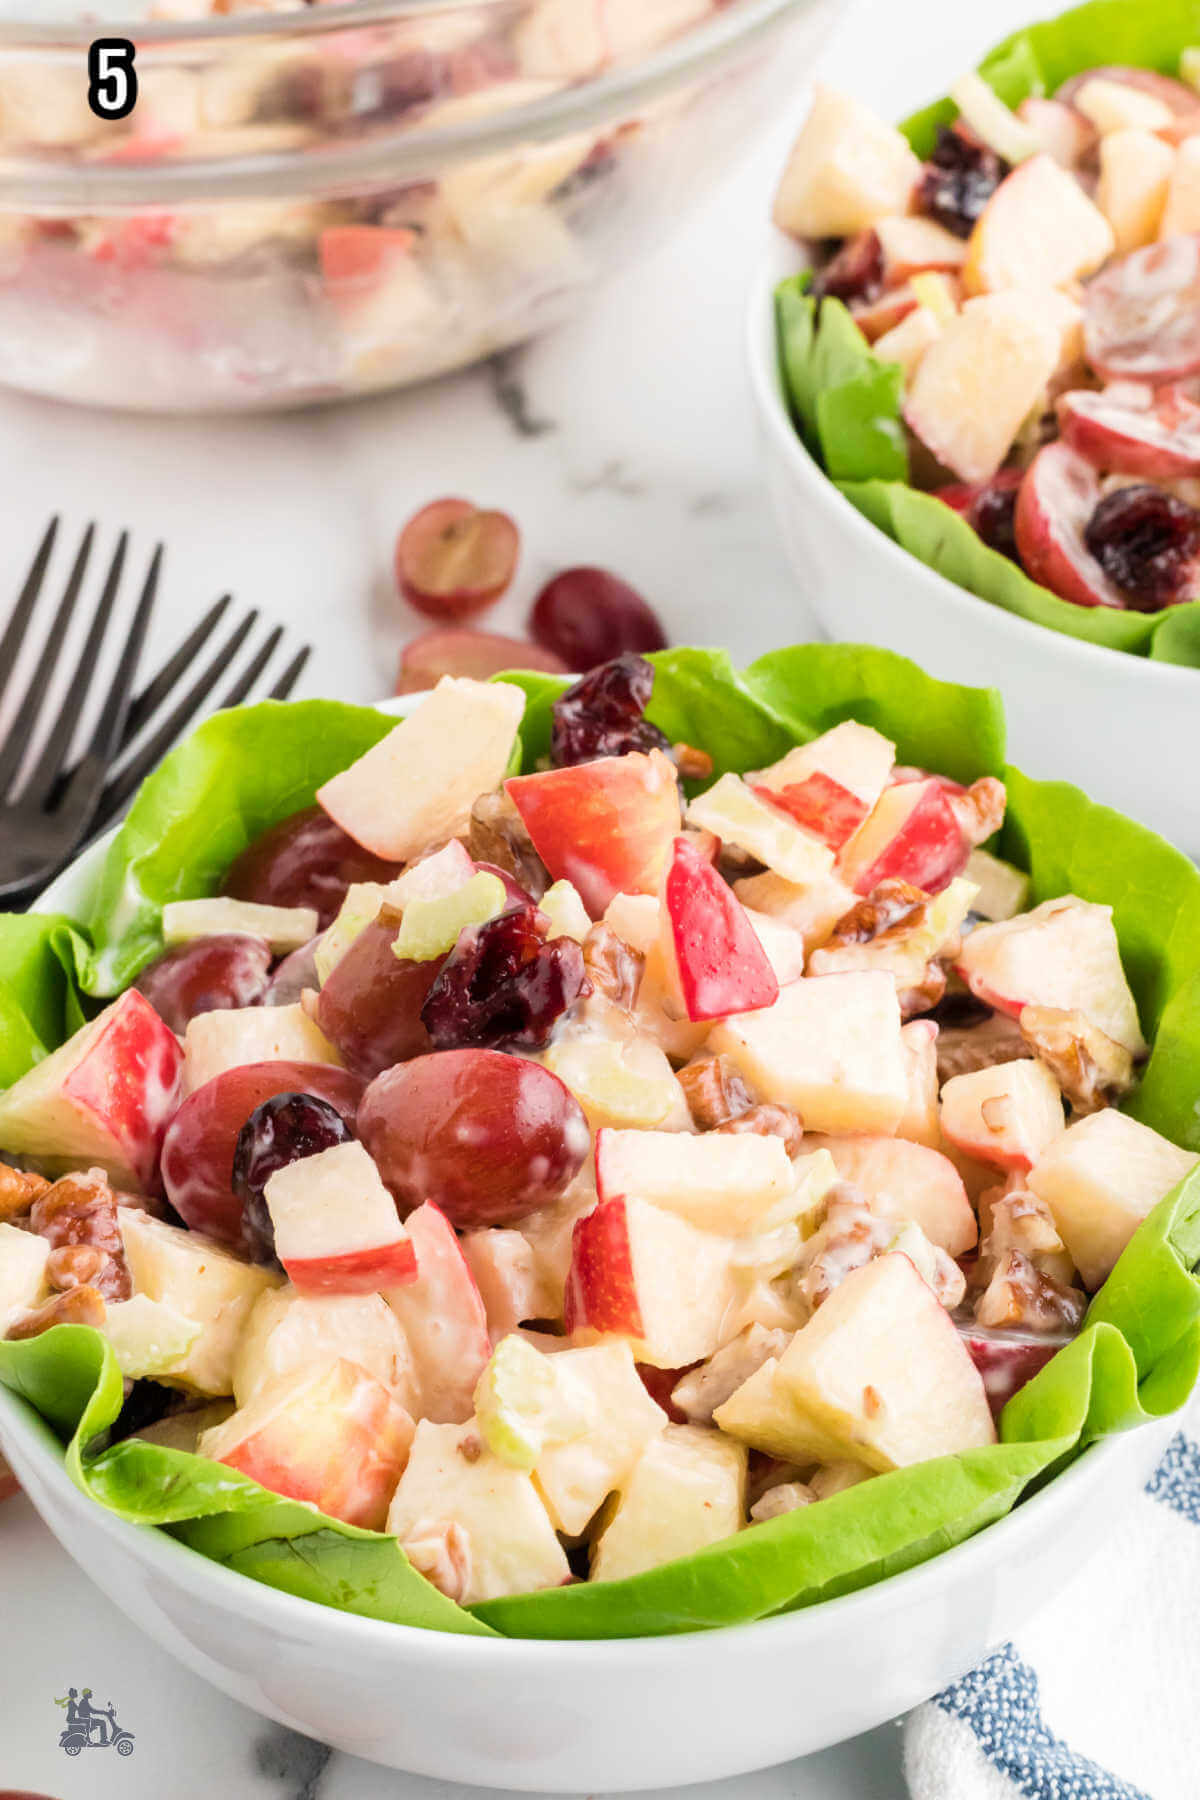 The final step to making the Autumn Apple Salad with Red Grapes is to put it in a lettuce lined bowl. 